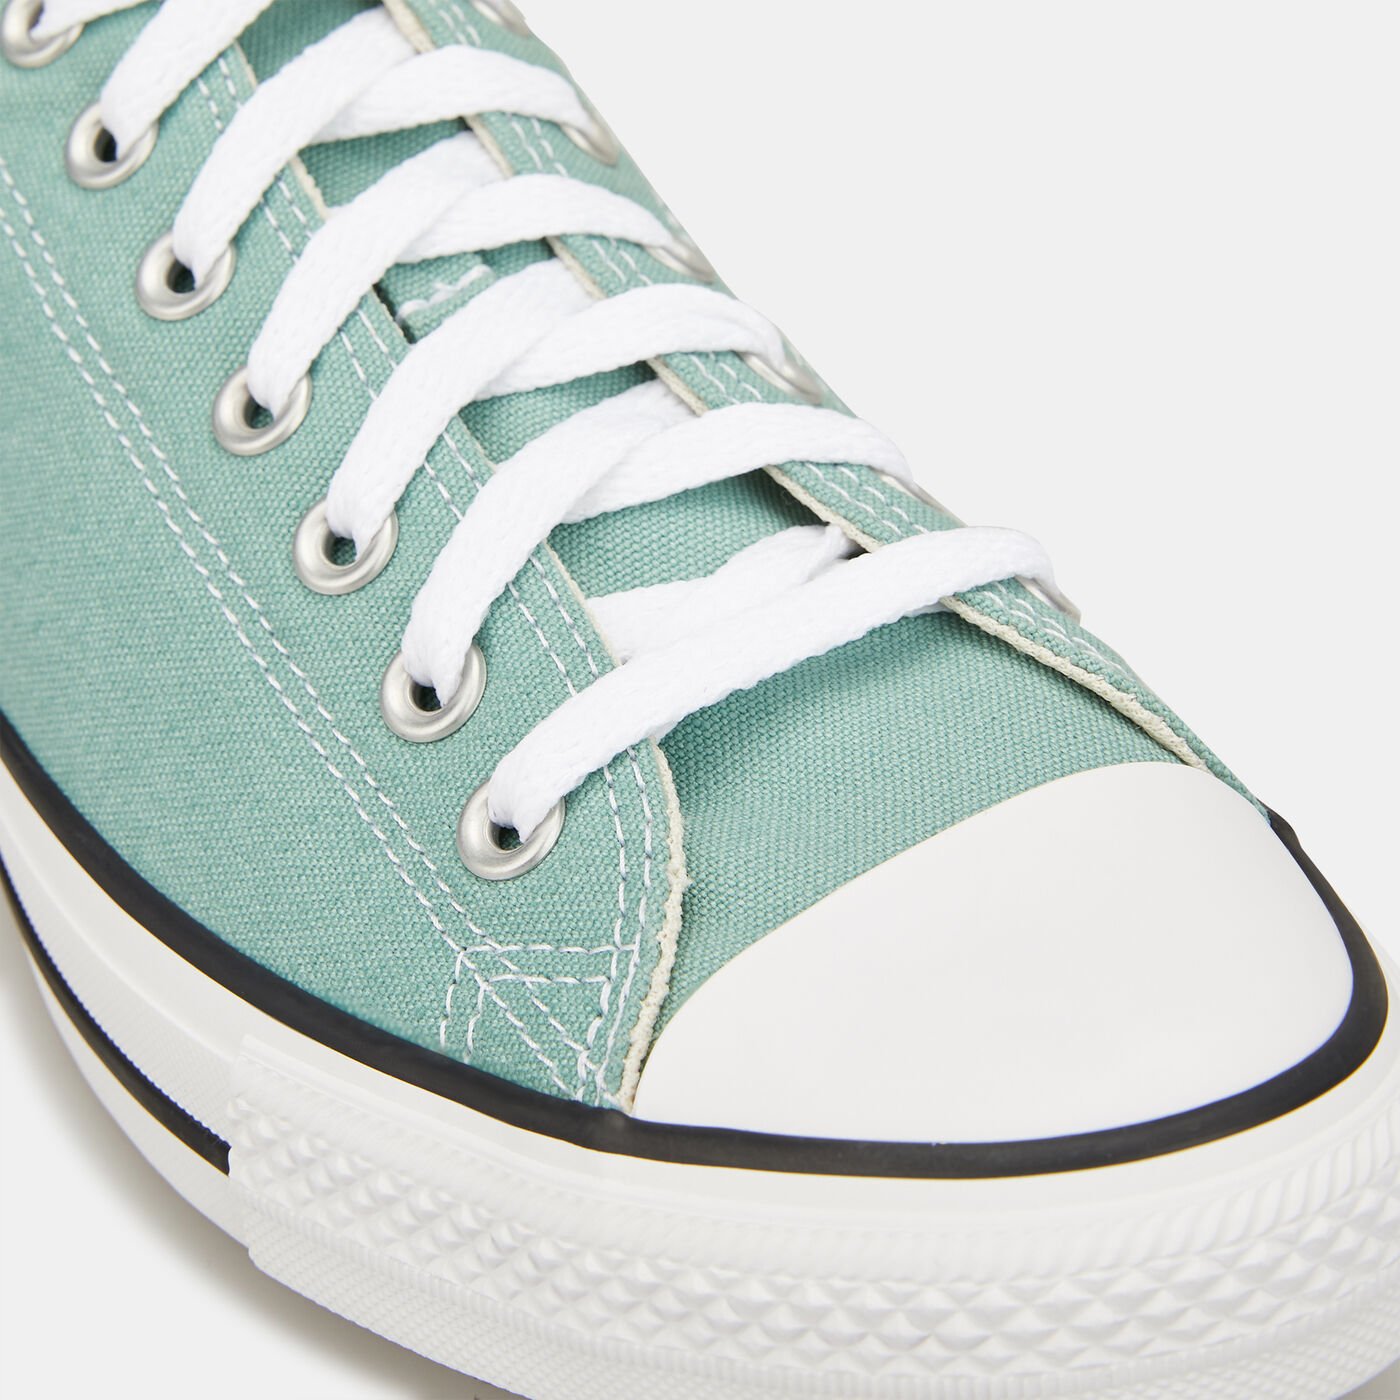 Chuck Taylor All Star Low Unisex Shoes